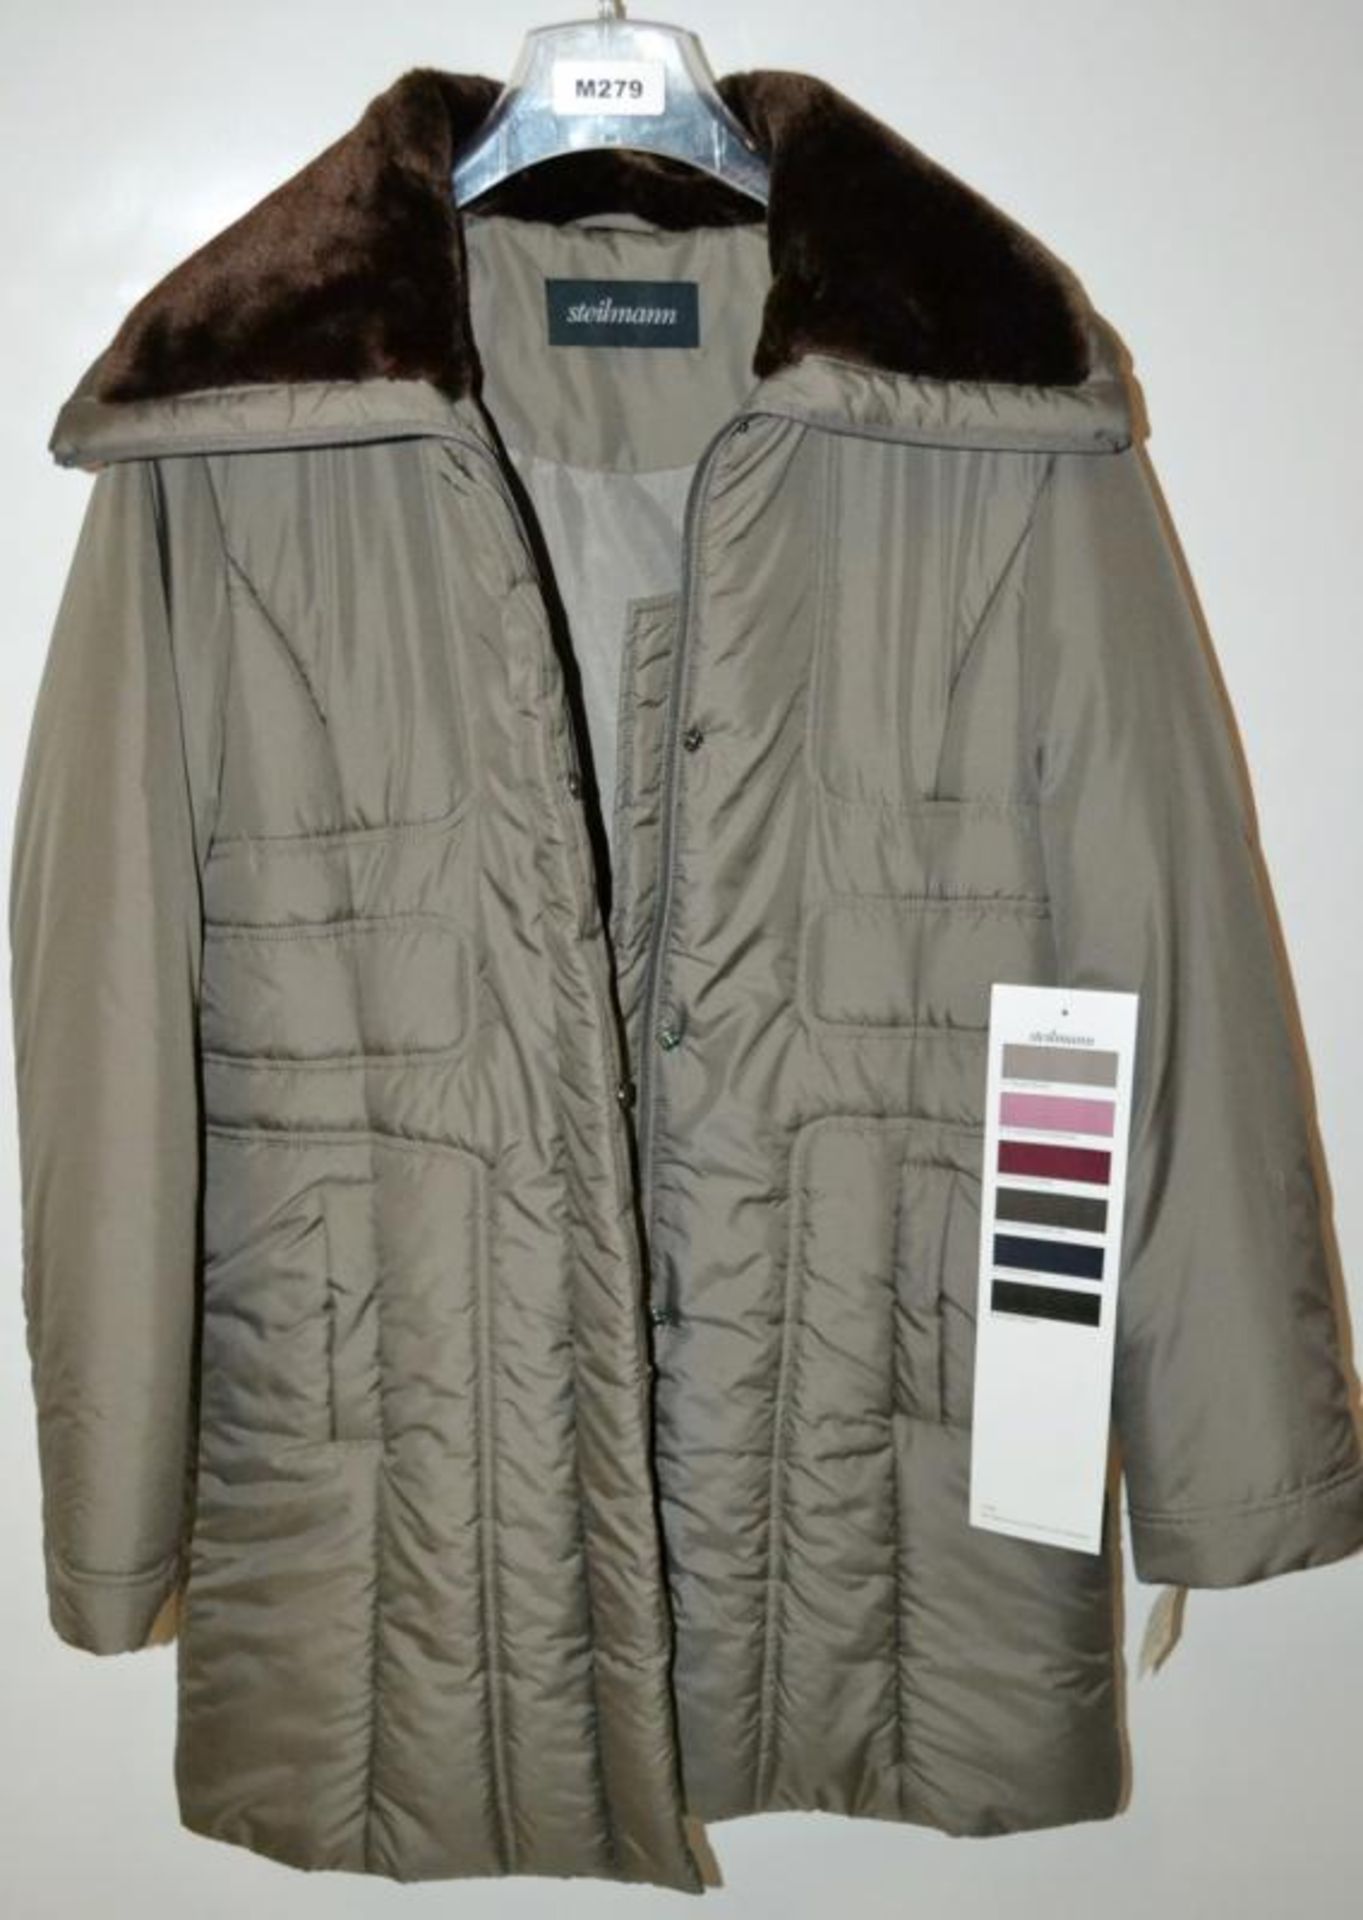 1 x Premium Steilmann Branded Womens Padded Winter Coat - Features Faux-Fur Lined Collar - Colour: K - Image 2 of 10